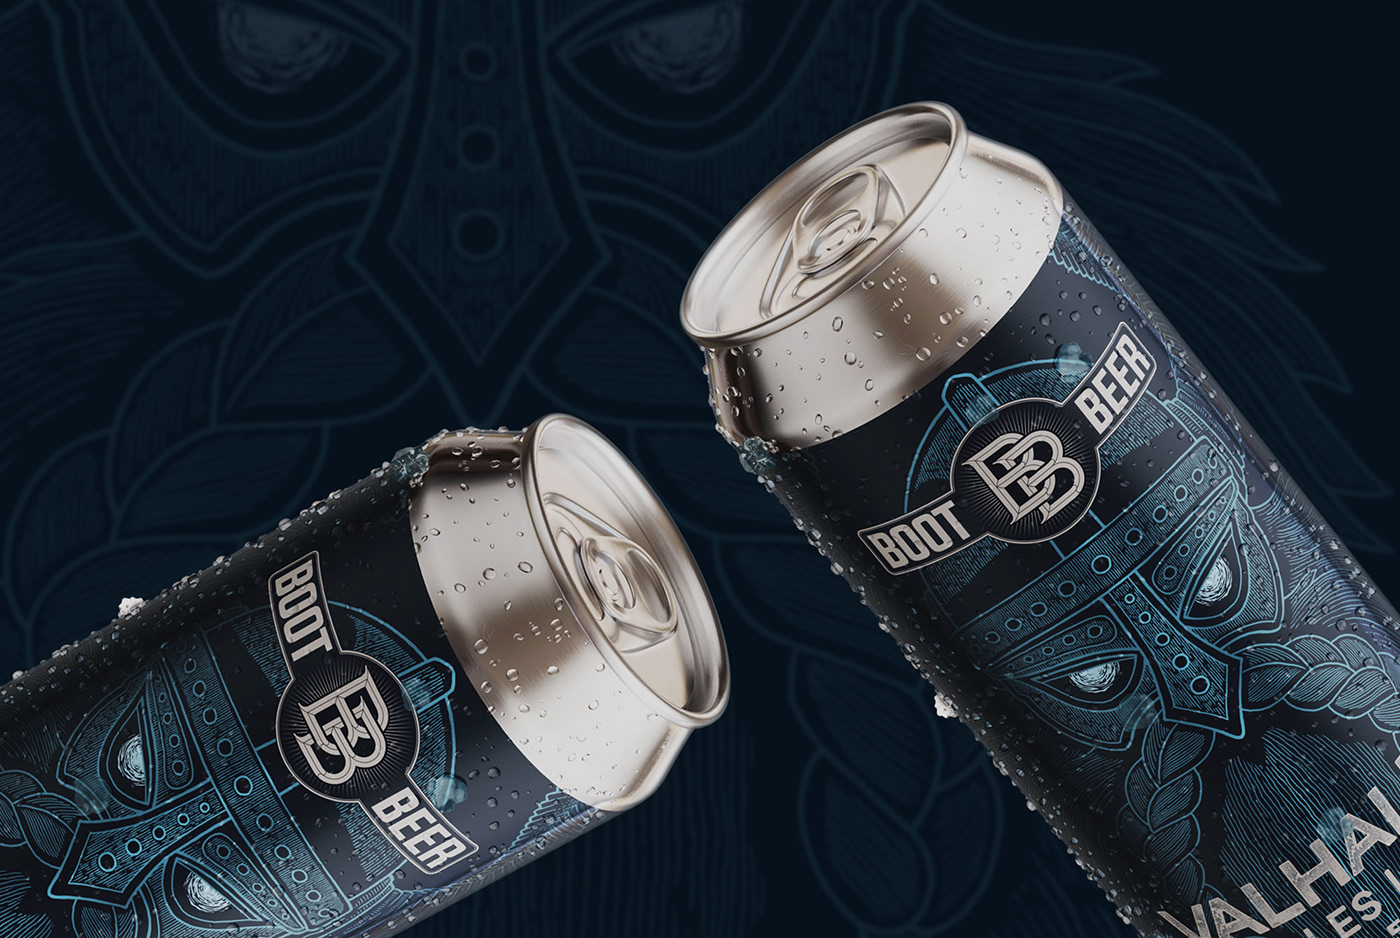 hand drawn craft beer can label design featuring a blue bearded viking face wearing a helmet